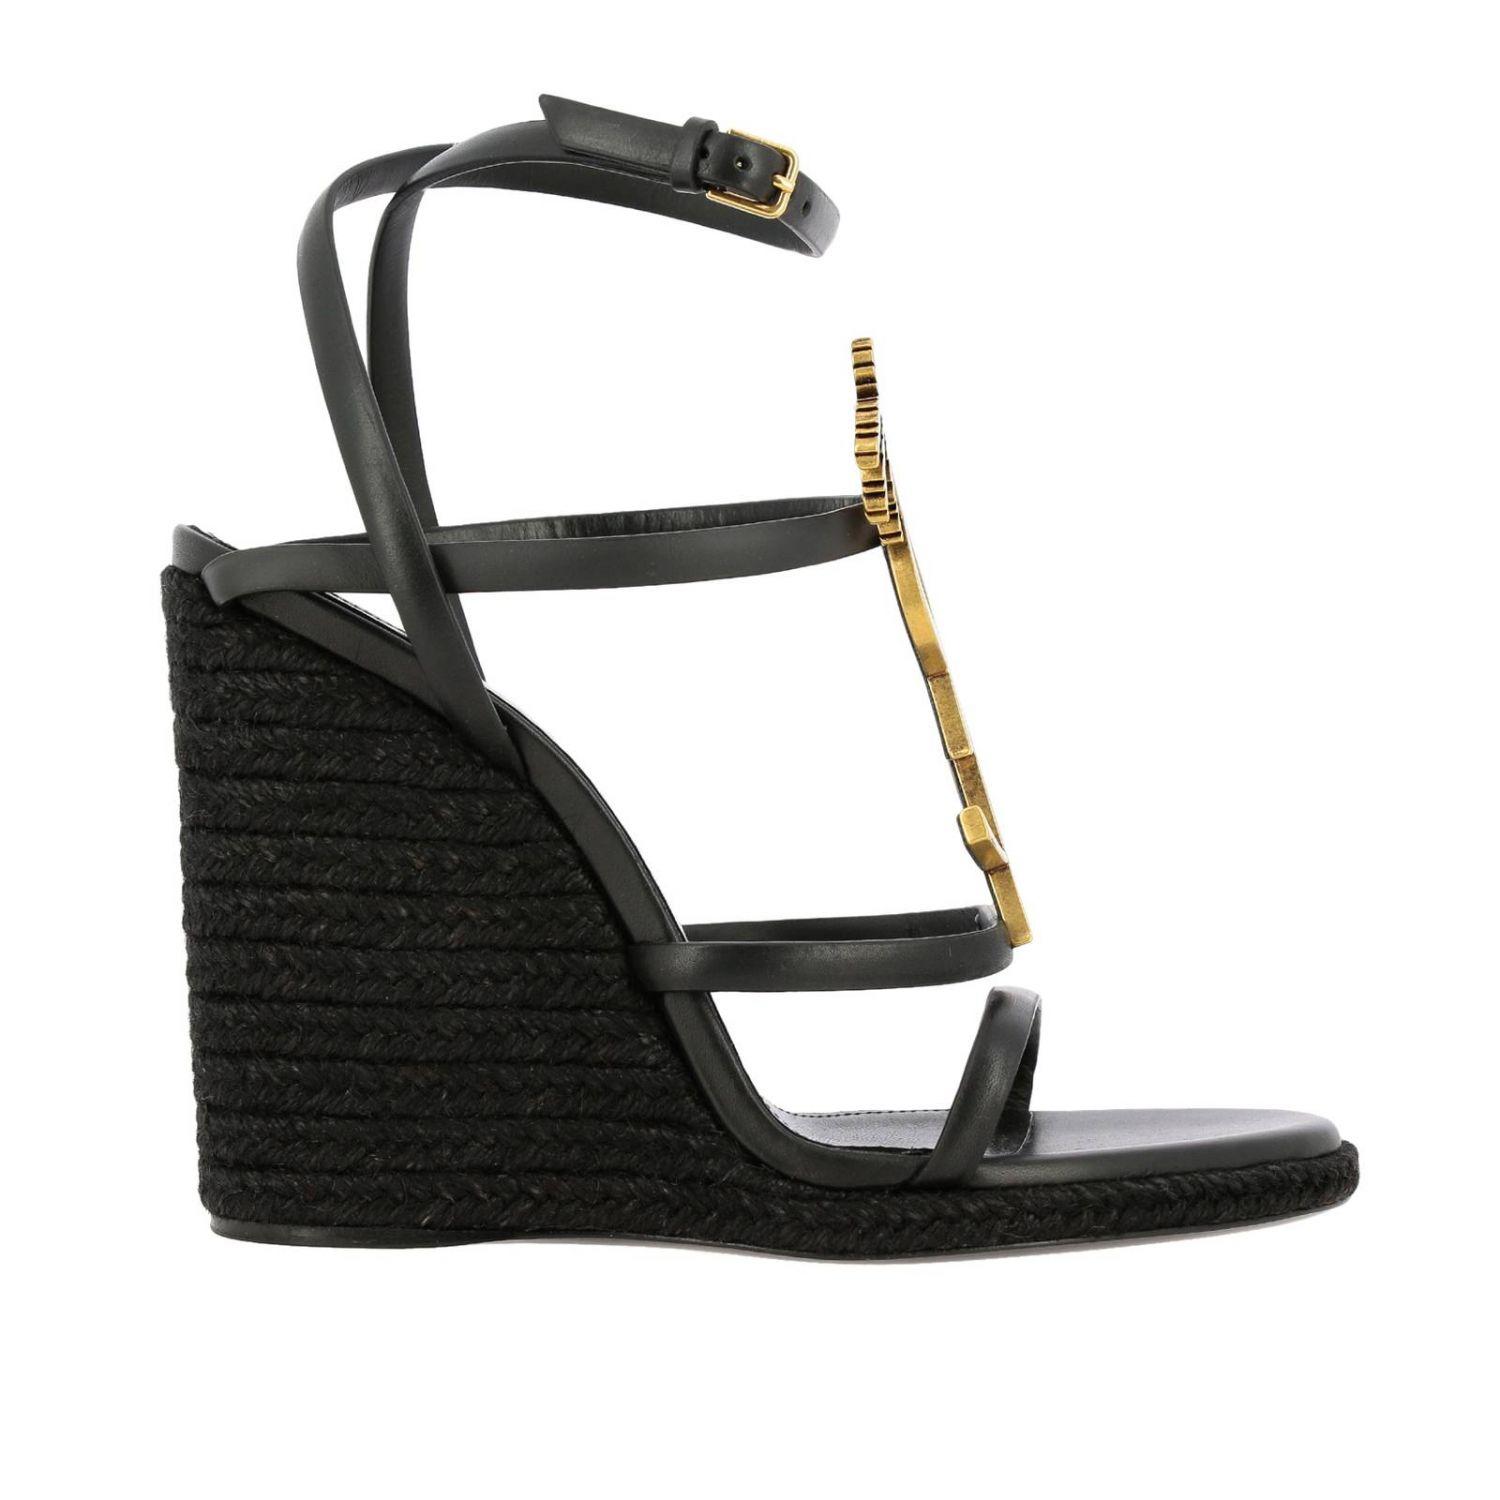 Saint Laurent Synthetic Leather Wedge Sandals With Ysl Monogram in ...